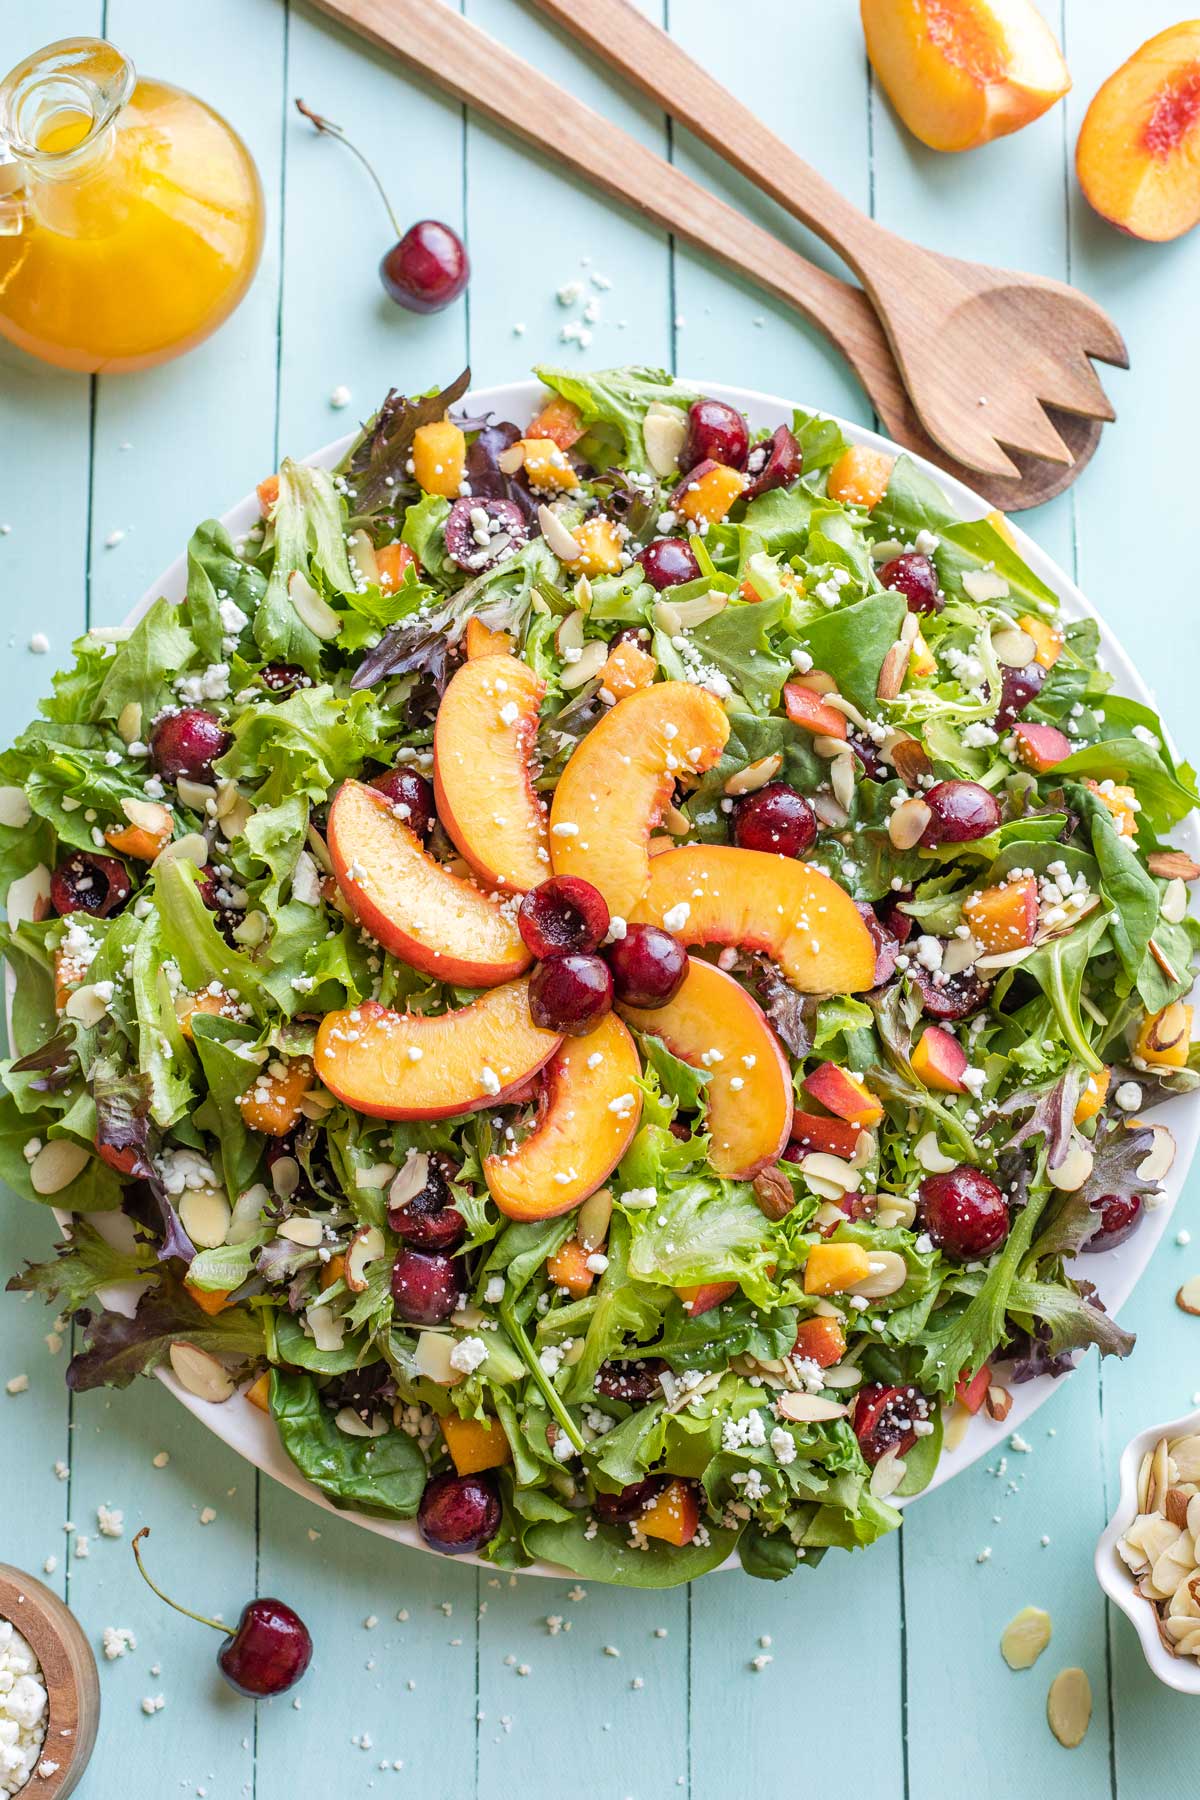 Overhead of serving platter with peach slices decoratively arranged like a sunshine in the middle of finished salad.